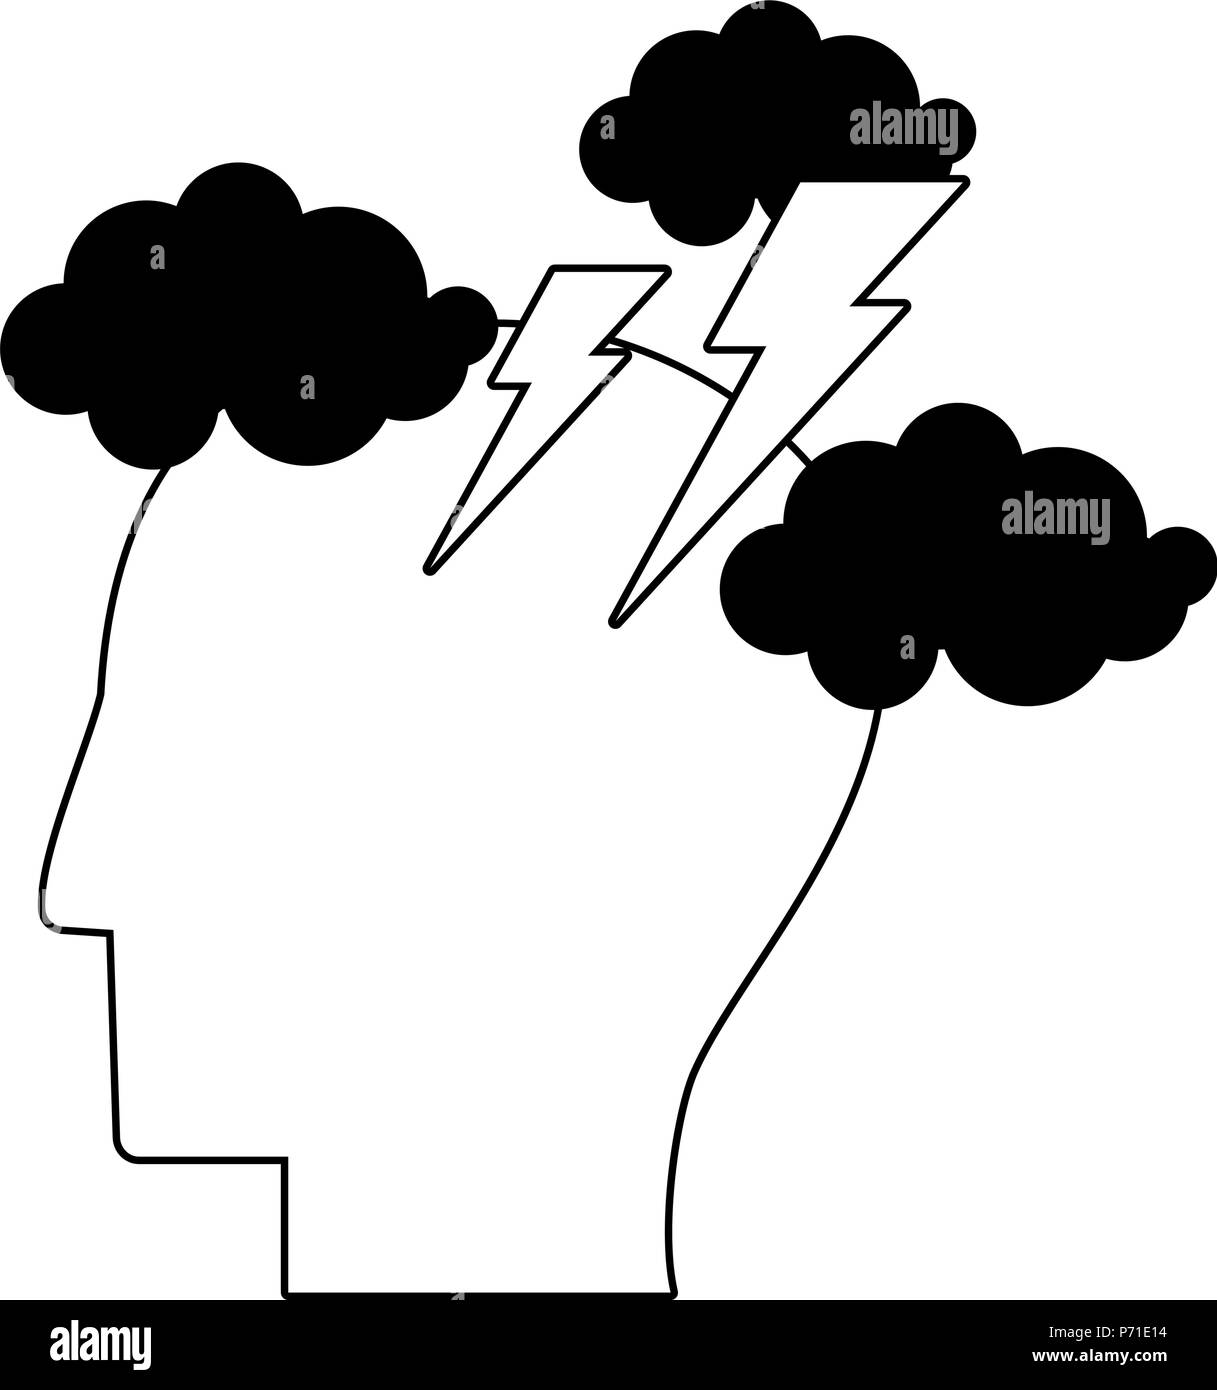 Attacked mind cartoon in black and white Stock Vector